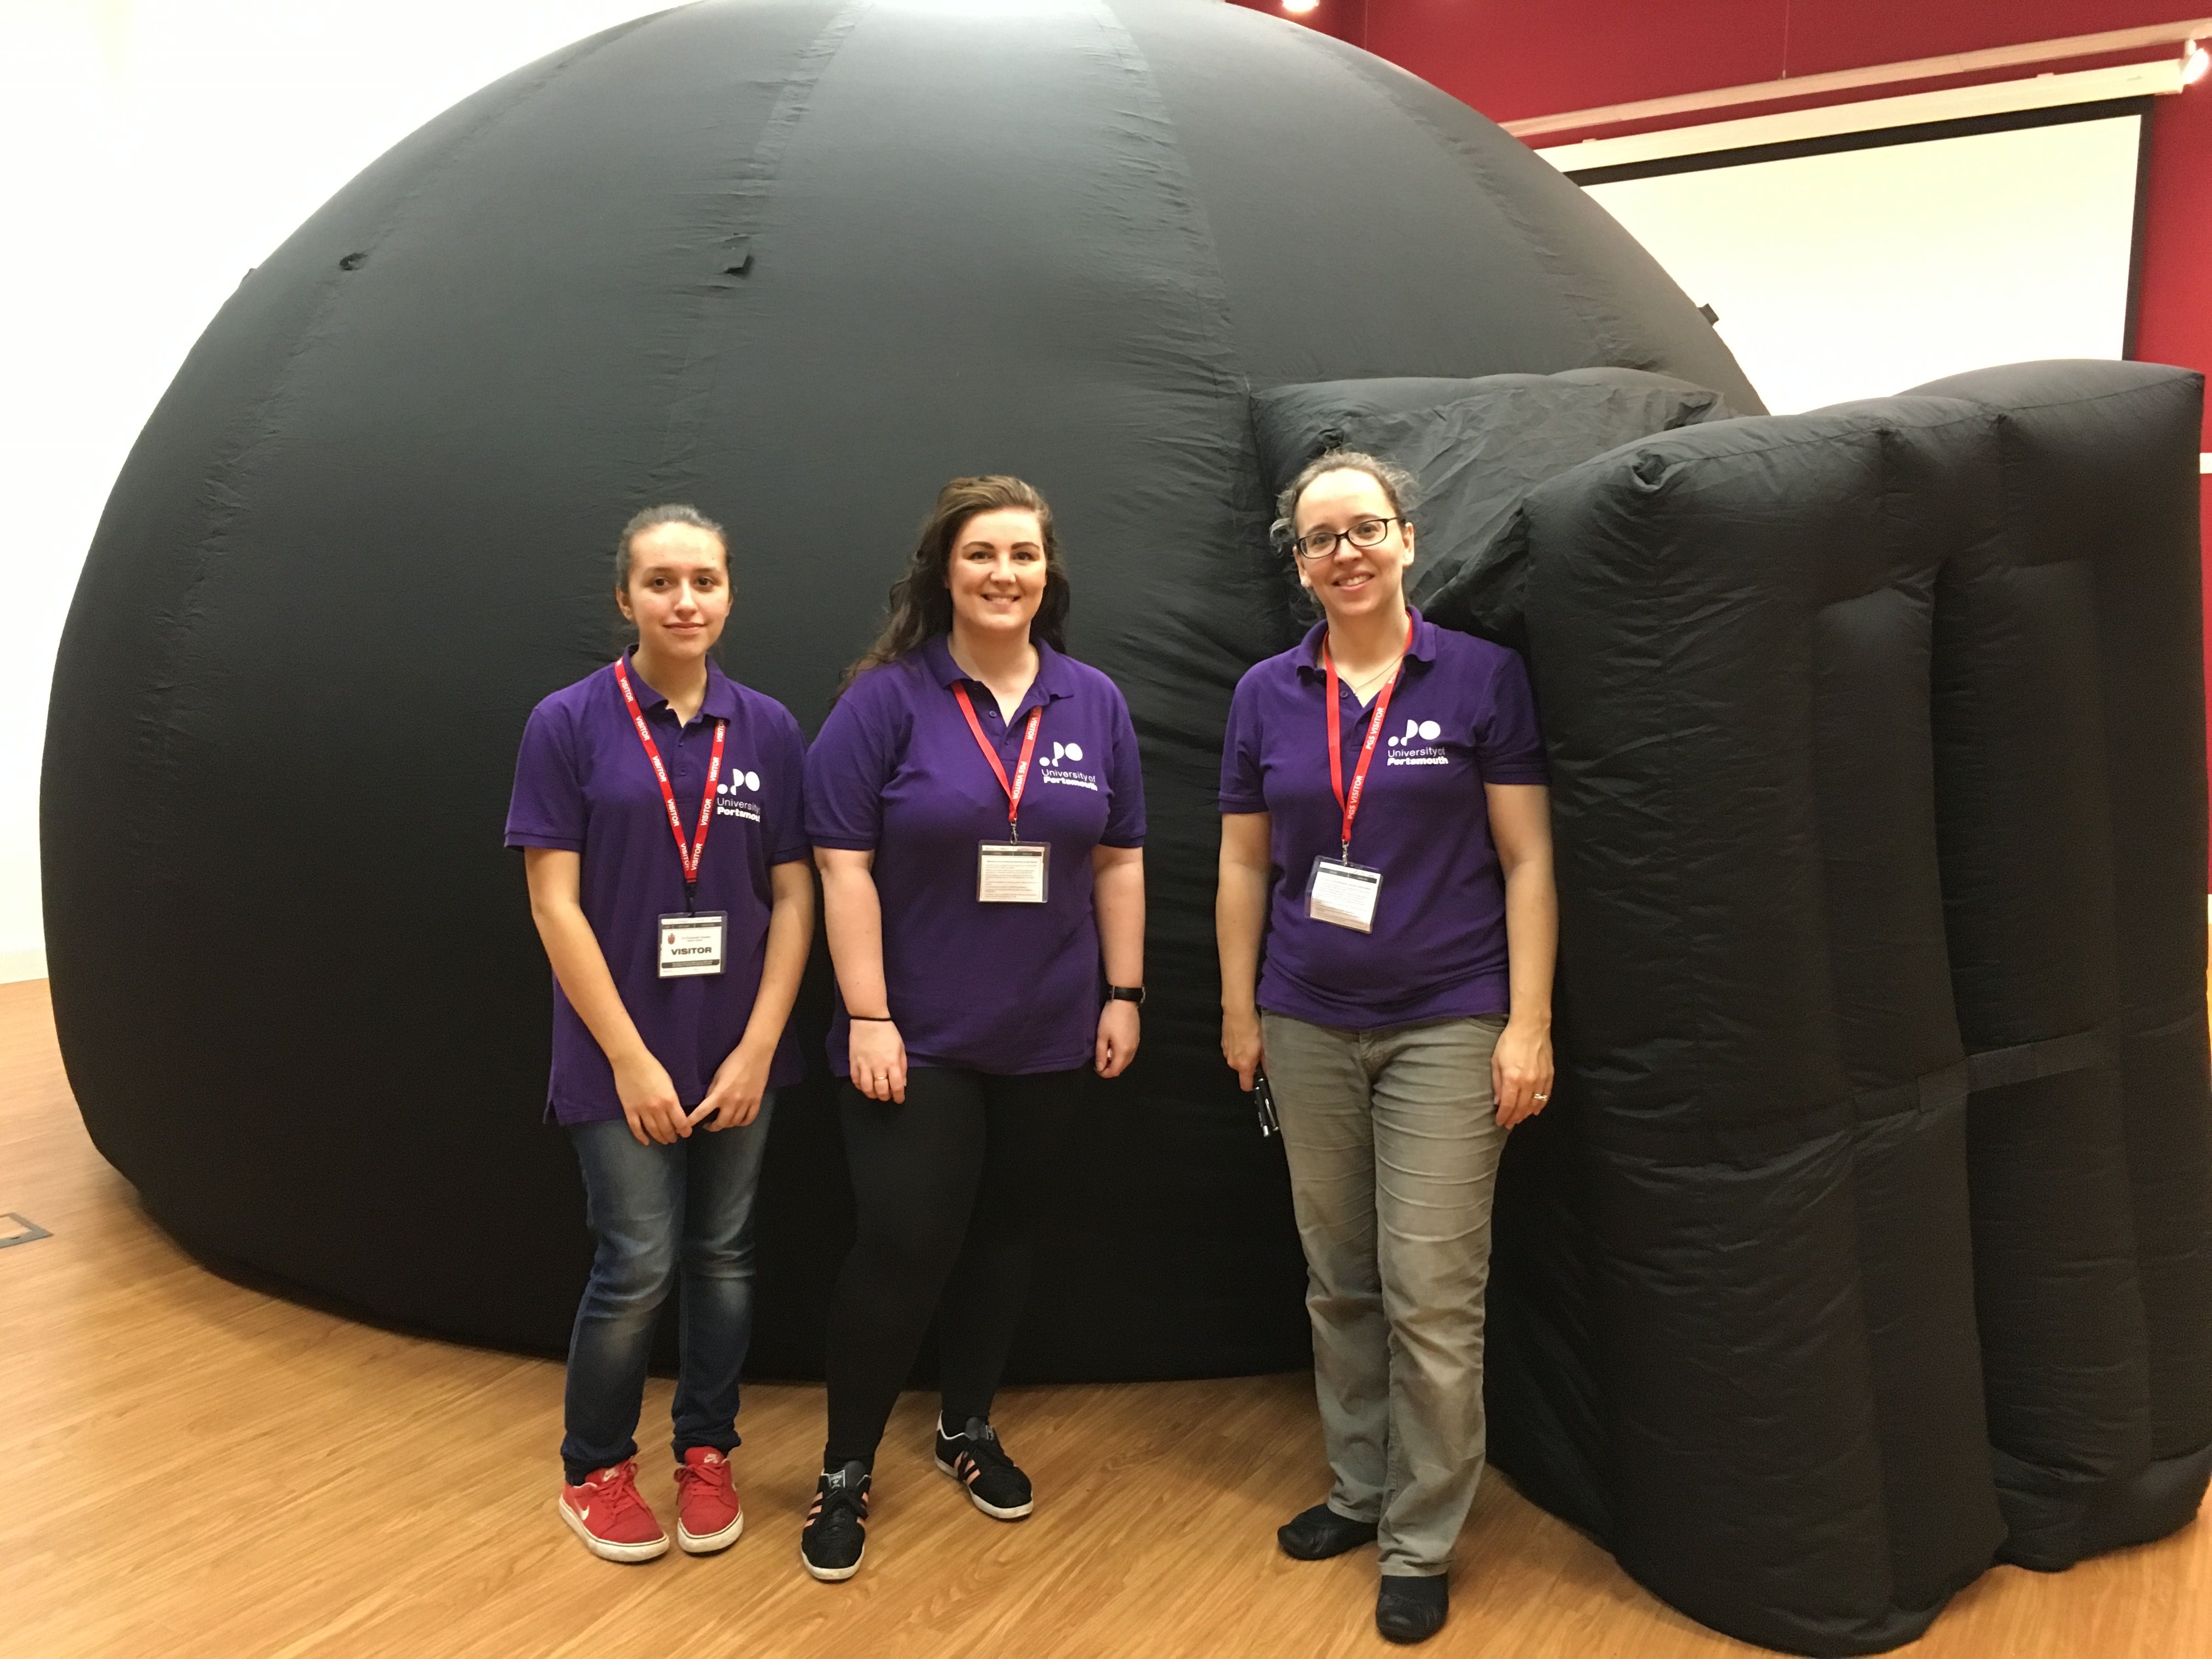 Wiktoria, Charlotte and Karen with the ICG astrodome at the Bright Sparks event.